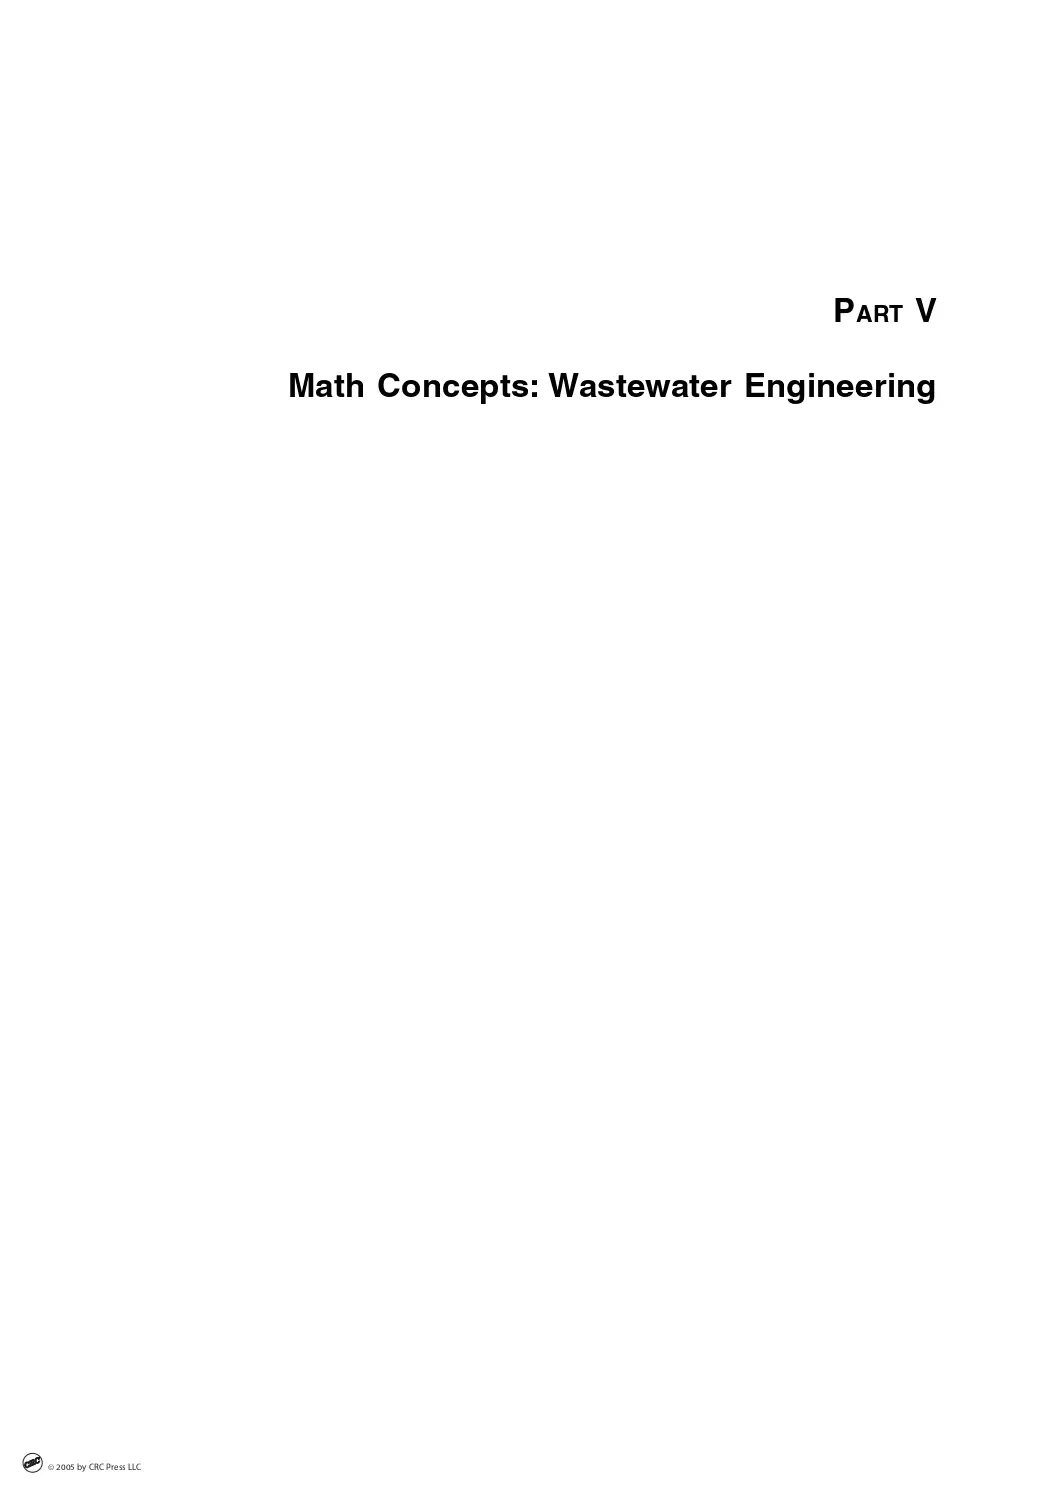 Math Concepts: Wastewater Engineering